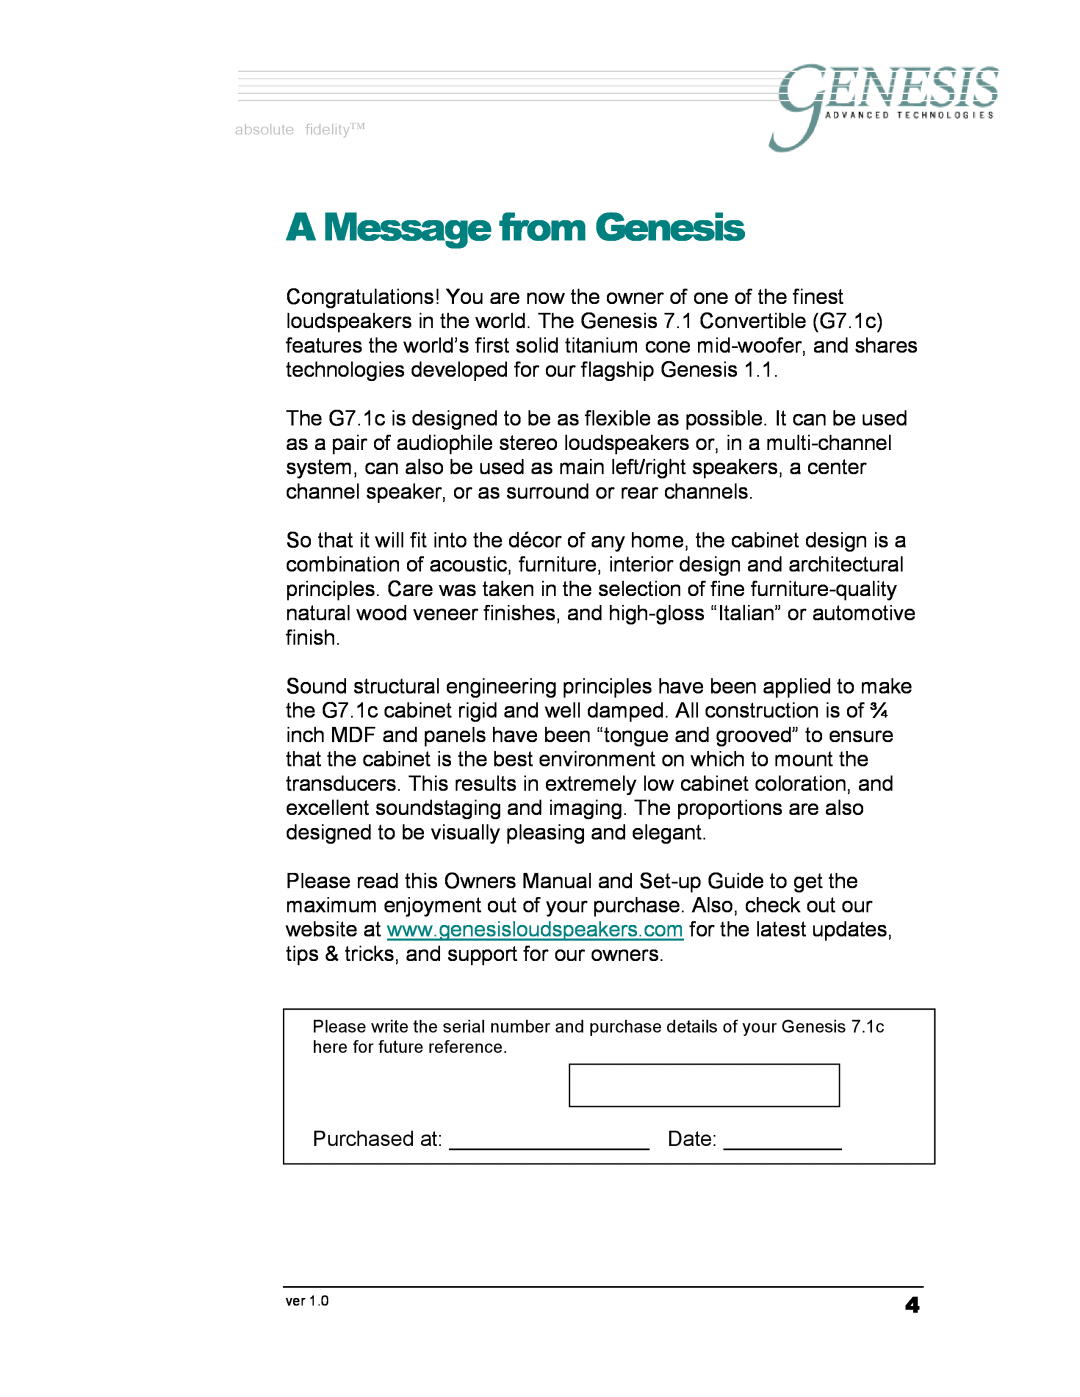 Genesis Advanced Technologies G7.1c owner manual A Message from Genesis, absolute fidelity 